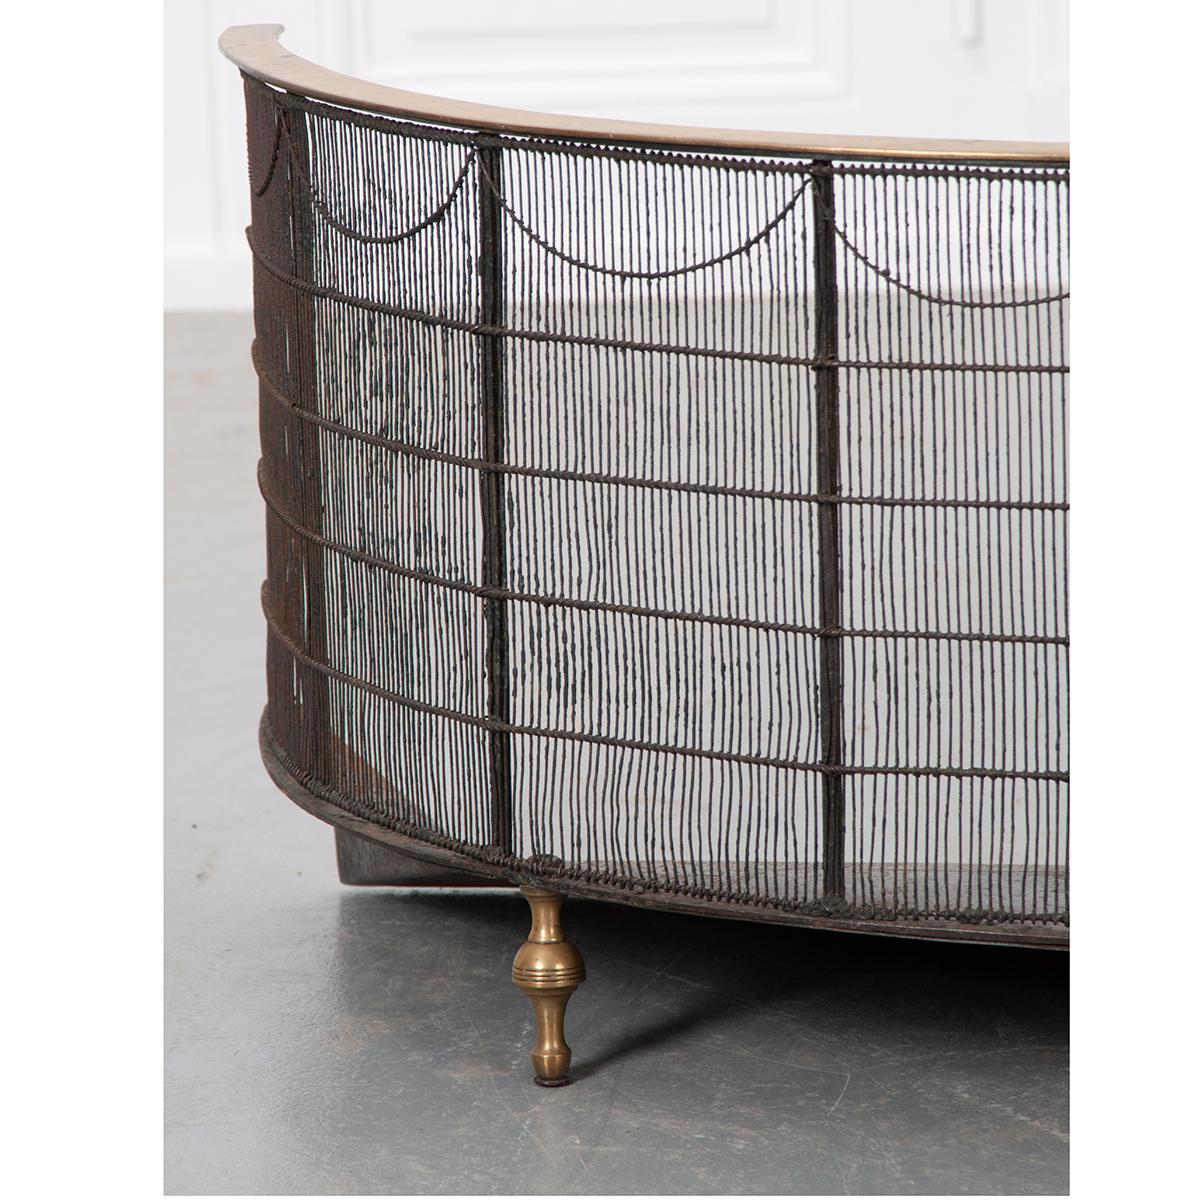 This is a beautiful English, brass and iron fire screen or nursery guard, circa 1830. It has a demilune shape with brass rail and feet. The iron framework and mesh-like surround has a swag design across the top just below the rail adding subtle